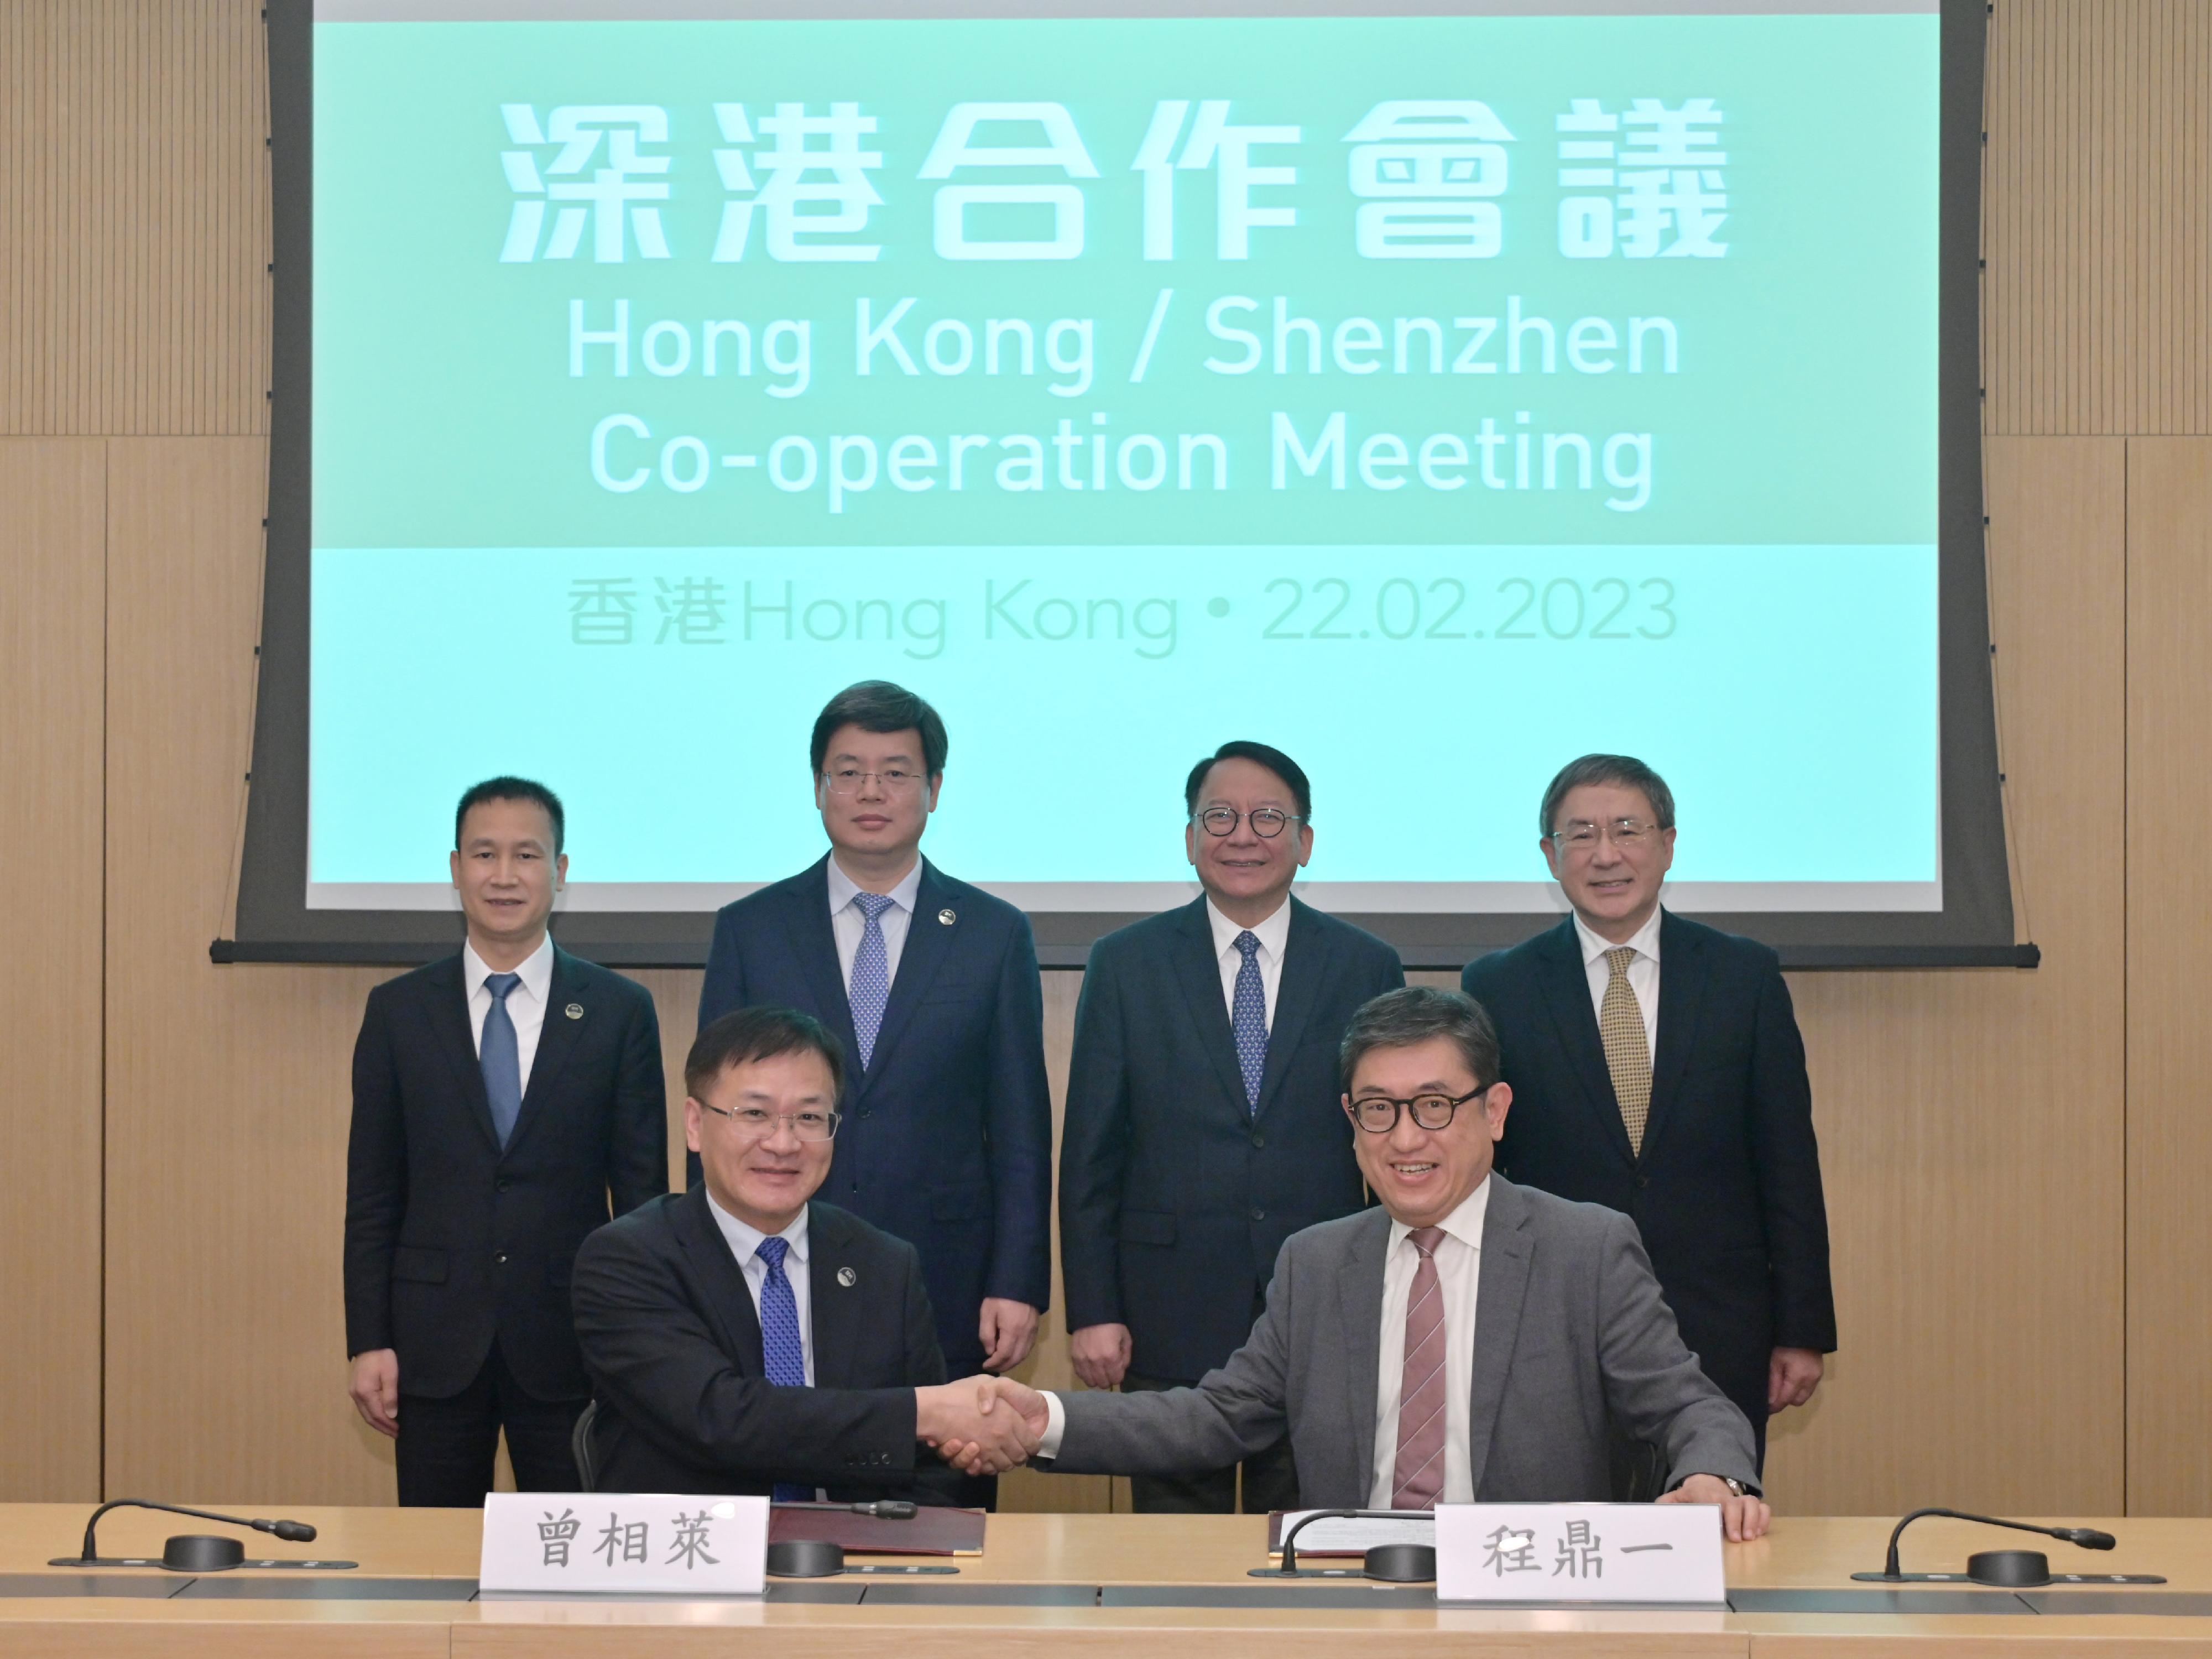 The Chief Secretary for Administration of the Government of the Hong Kong Special Administrative Region, Mr Chan Kwok-ki, and the Mayor of the Shenzhen Municipal Government, Mr Qin Weizhong, co-chaired the 2023 Hong Kong/Shenzhen Co-operation Meeting in Hong Kong on February 22 and witnessed the signing of three co-operation documents between Hong Kong and Shenzhen. Photo shows Mr Chan (back row, second right) and Mr Qin (back row, second left) witnessing the signing of the Tourism Co-operation Agreement between the Hong Kong Tourism Board and the Shenzhen Bureau of Culture, Radio, Television, Tourism and Sports.